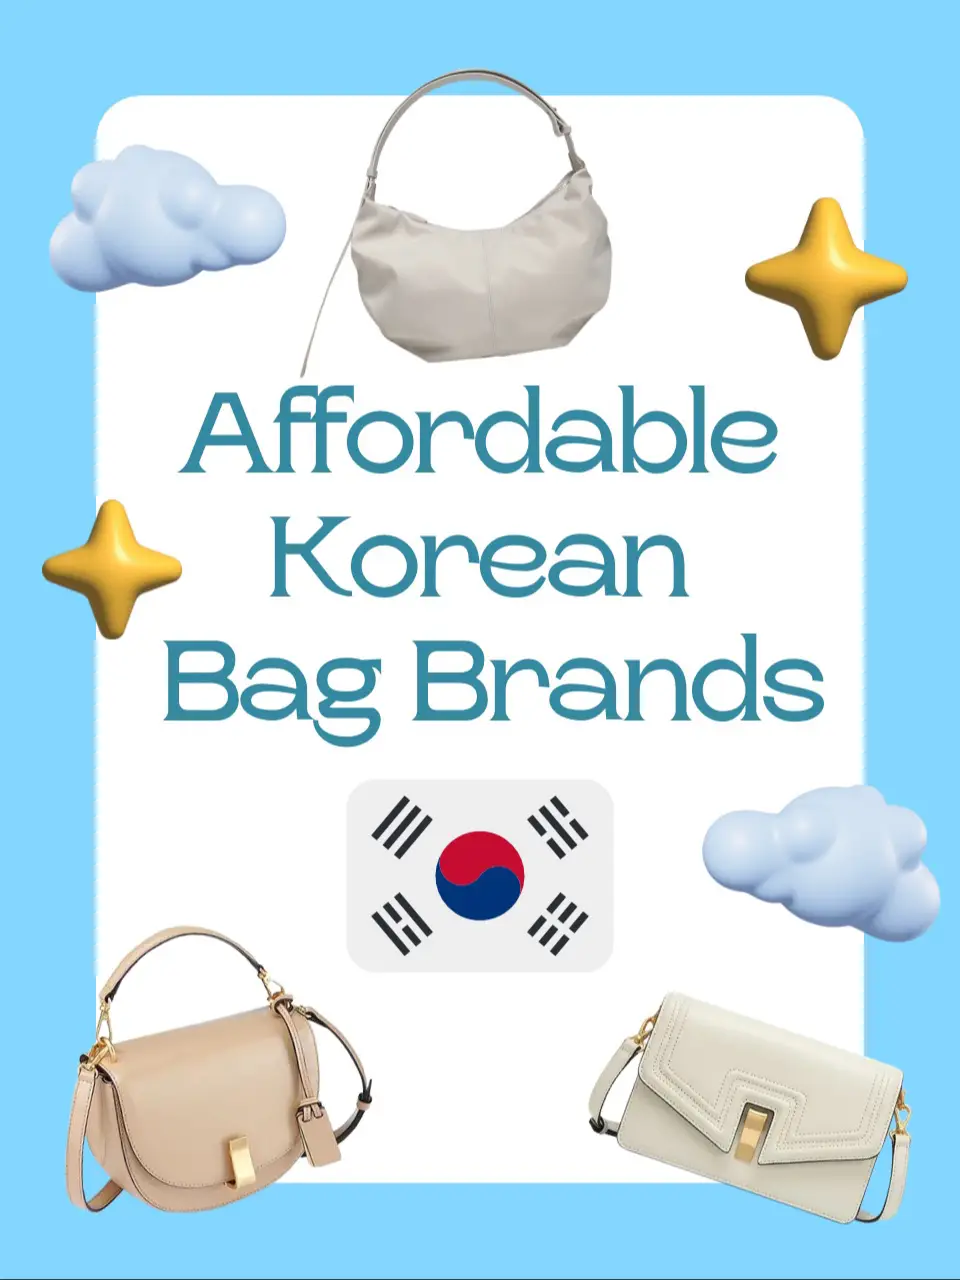 Korean bag brands you must know 👜👛🇰🇷, Video published by Savi Chow